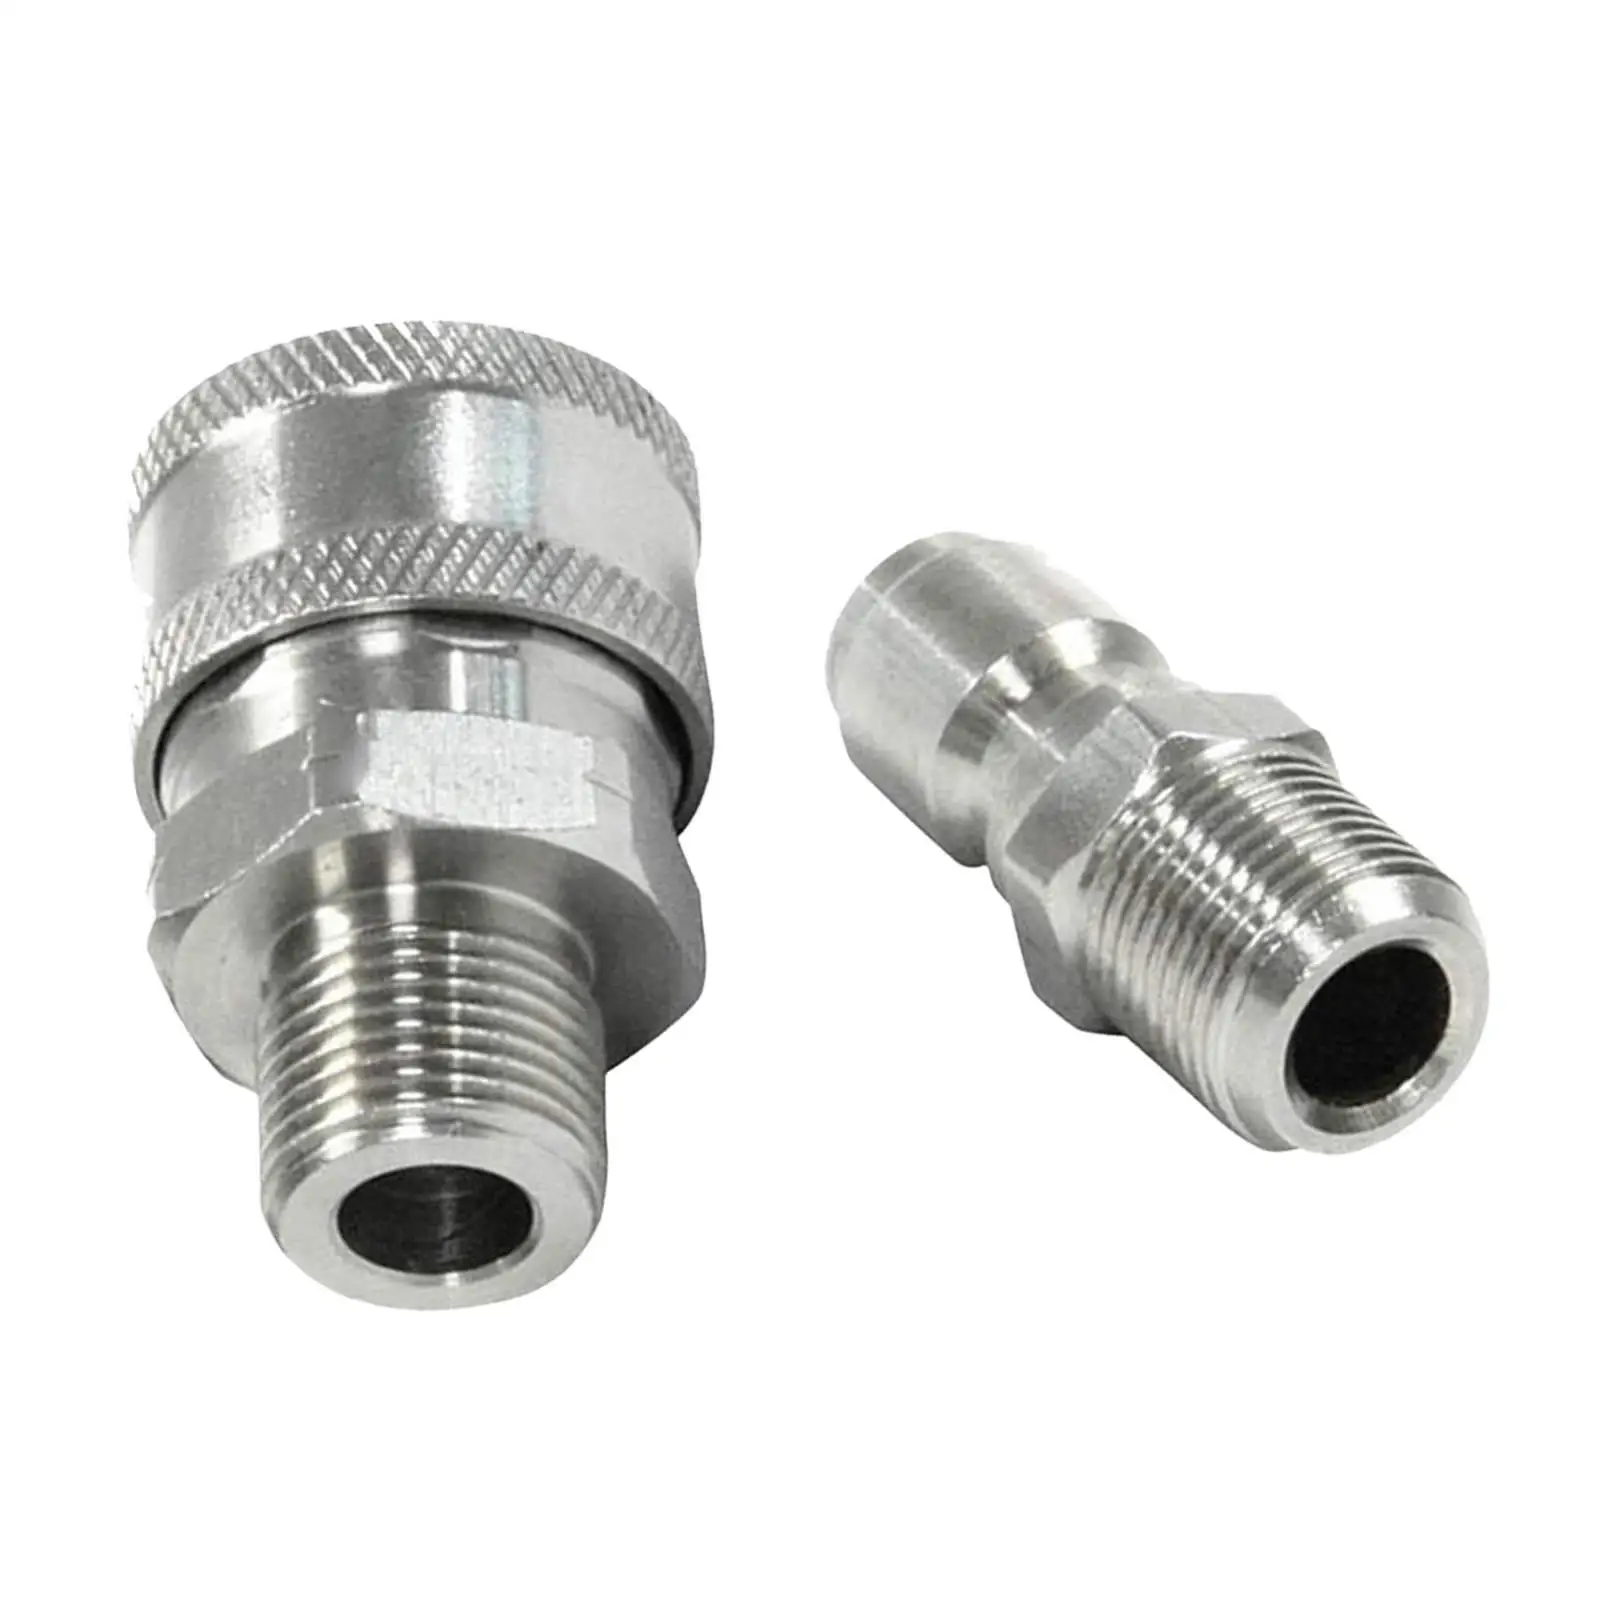 2 Pieces Pressure Washer Adapter Set 3/8 inch Hose Daily Tool Water Pump Quick Connect Kit Quick Release Connector 5000-6000 PSI